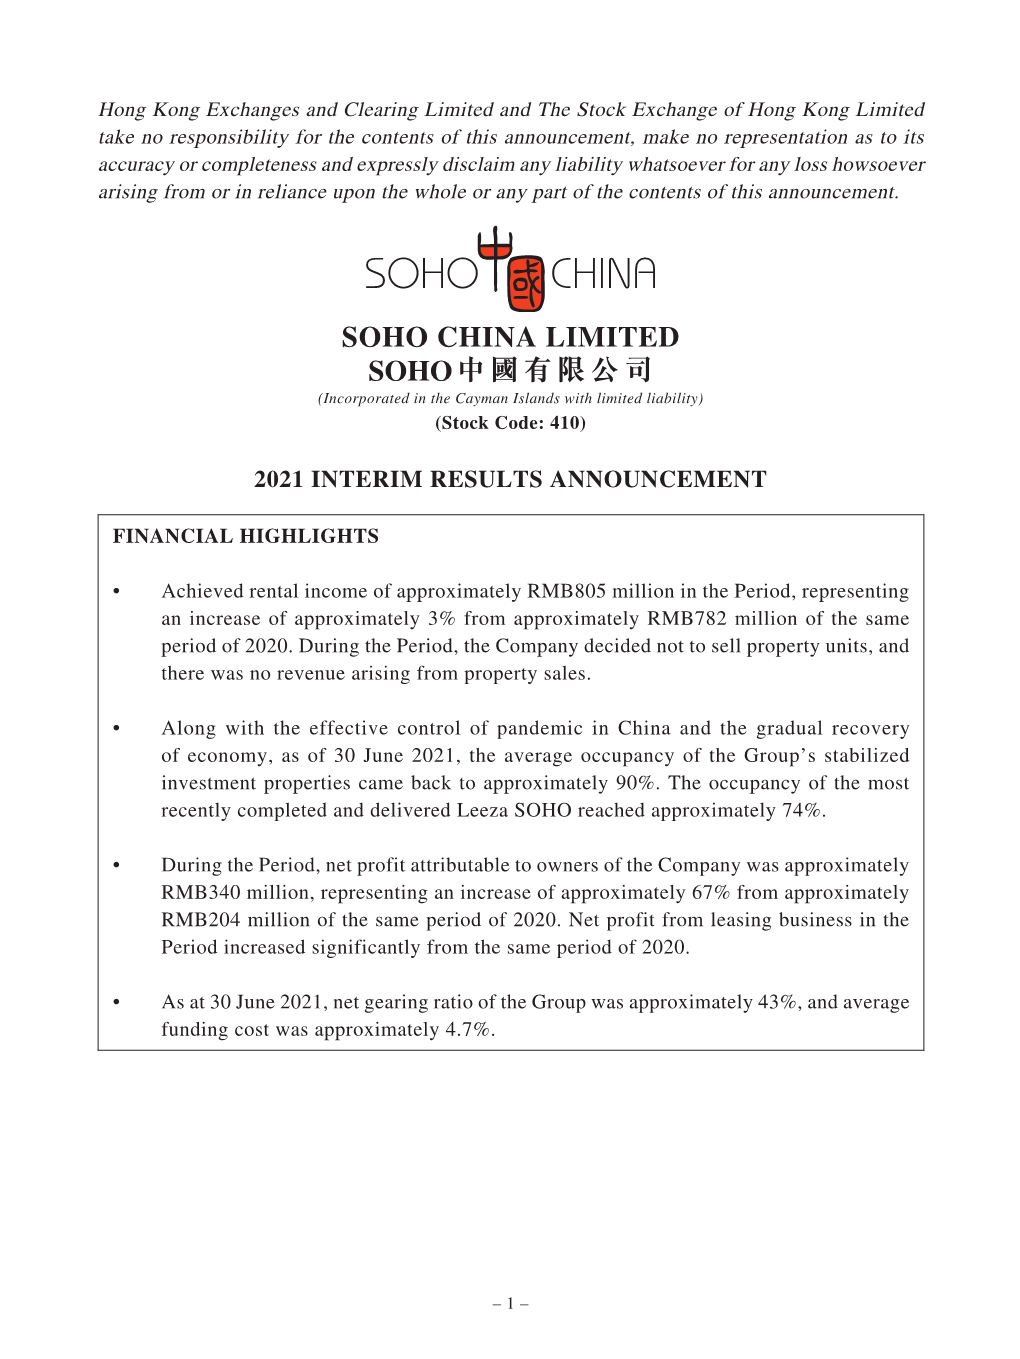 SOHO CHINA LIMITED SOHO中國有限公司 (Incorporated in the Cayman Islands with Limited Liability) (Stock Code: 410)